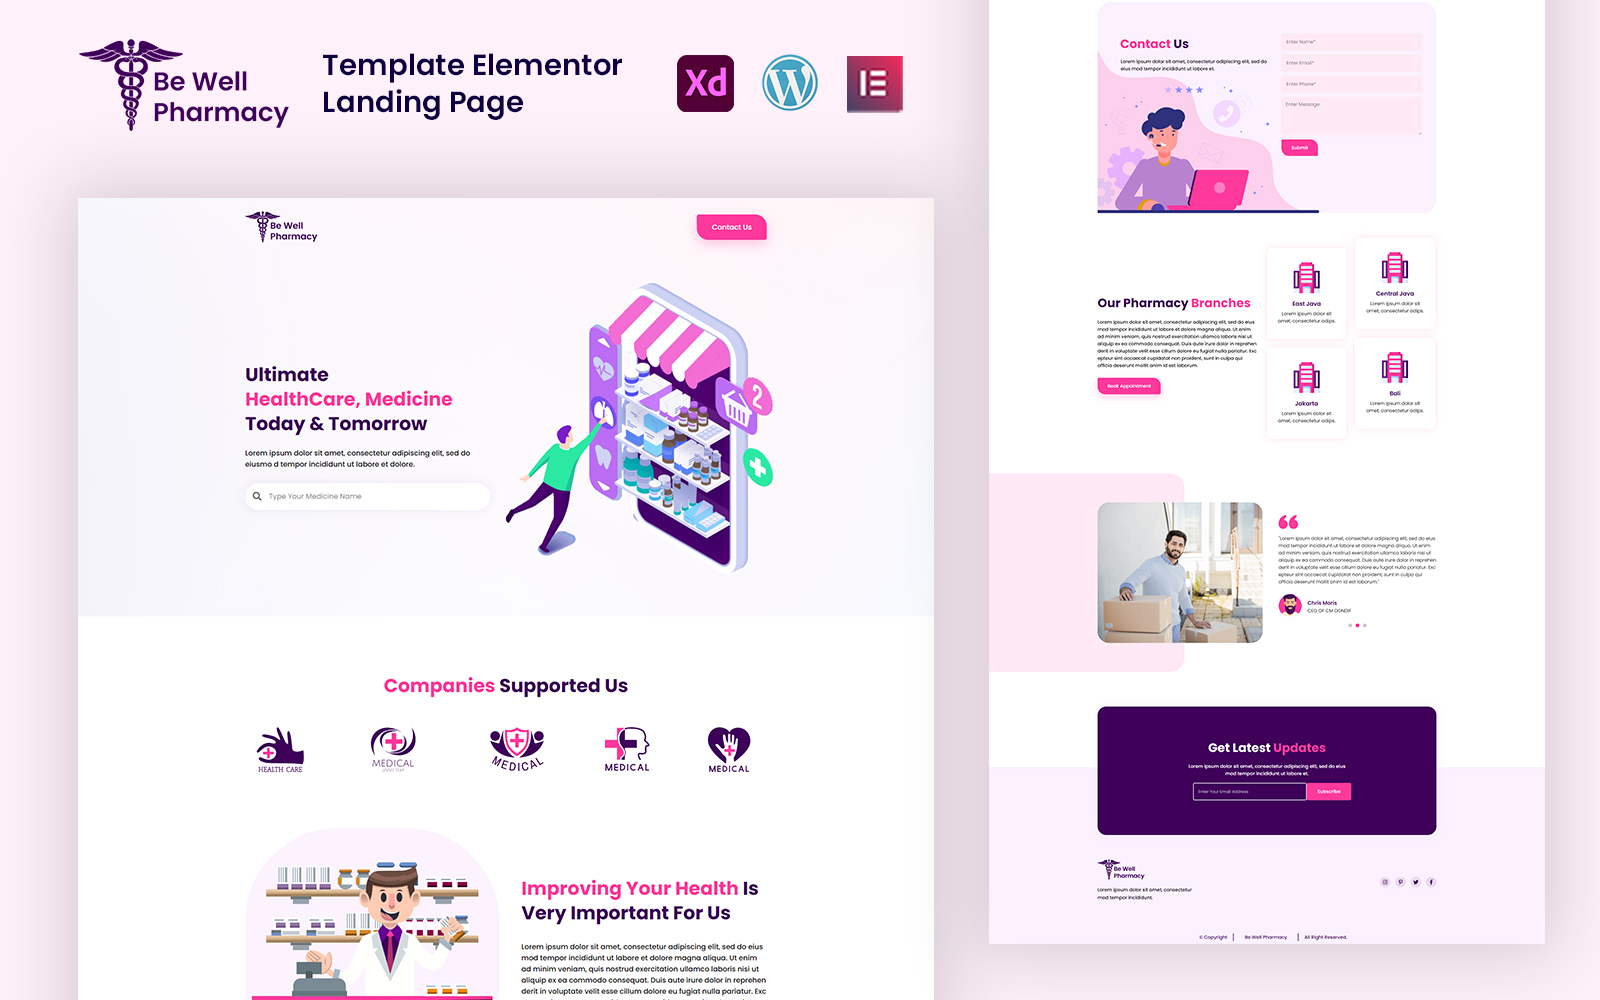 Be Well Pharmacy - Drug and Medicine Supplier Ready to Use Elementor Template